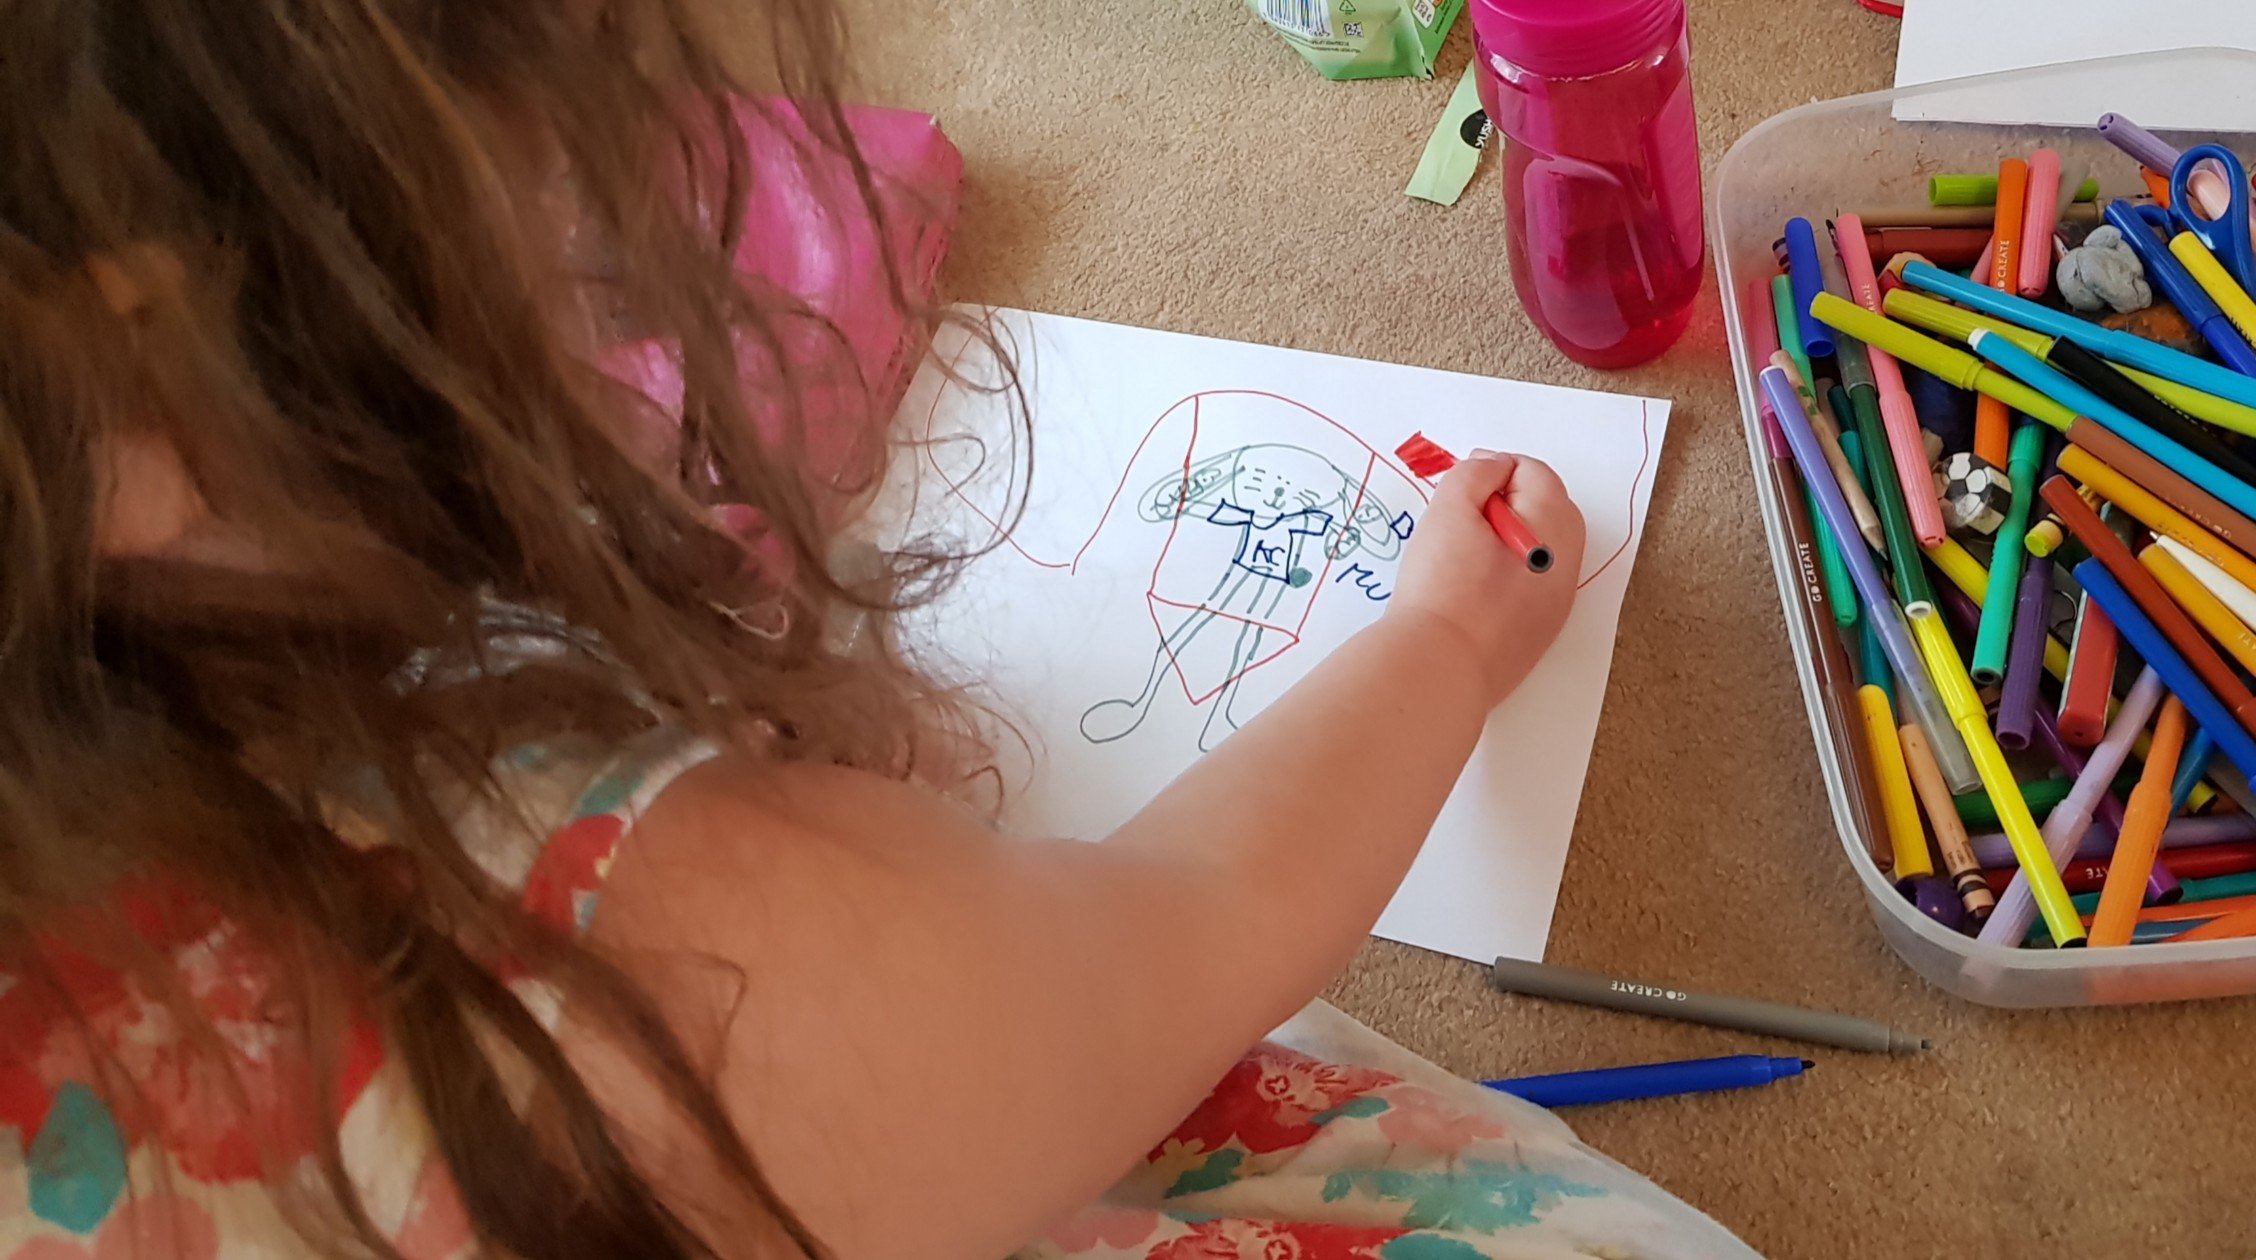 Squiggle drawing with art supplies